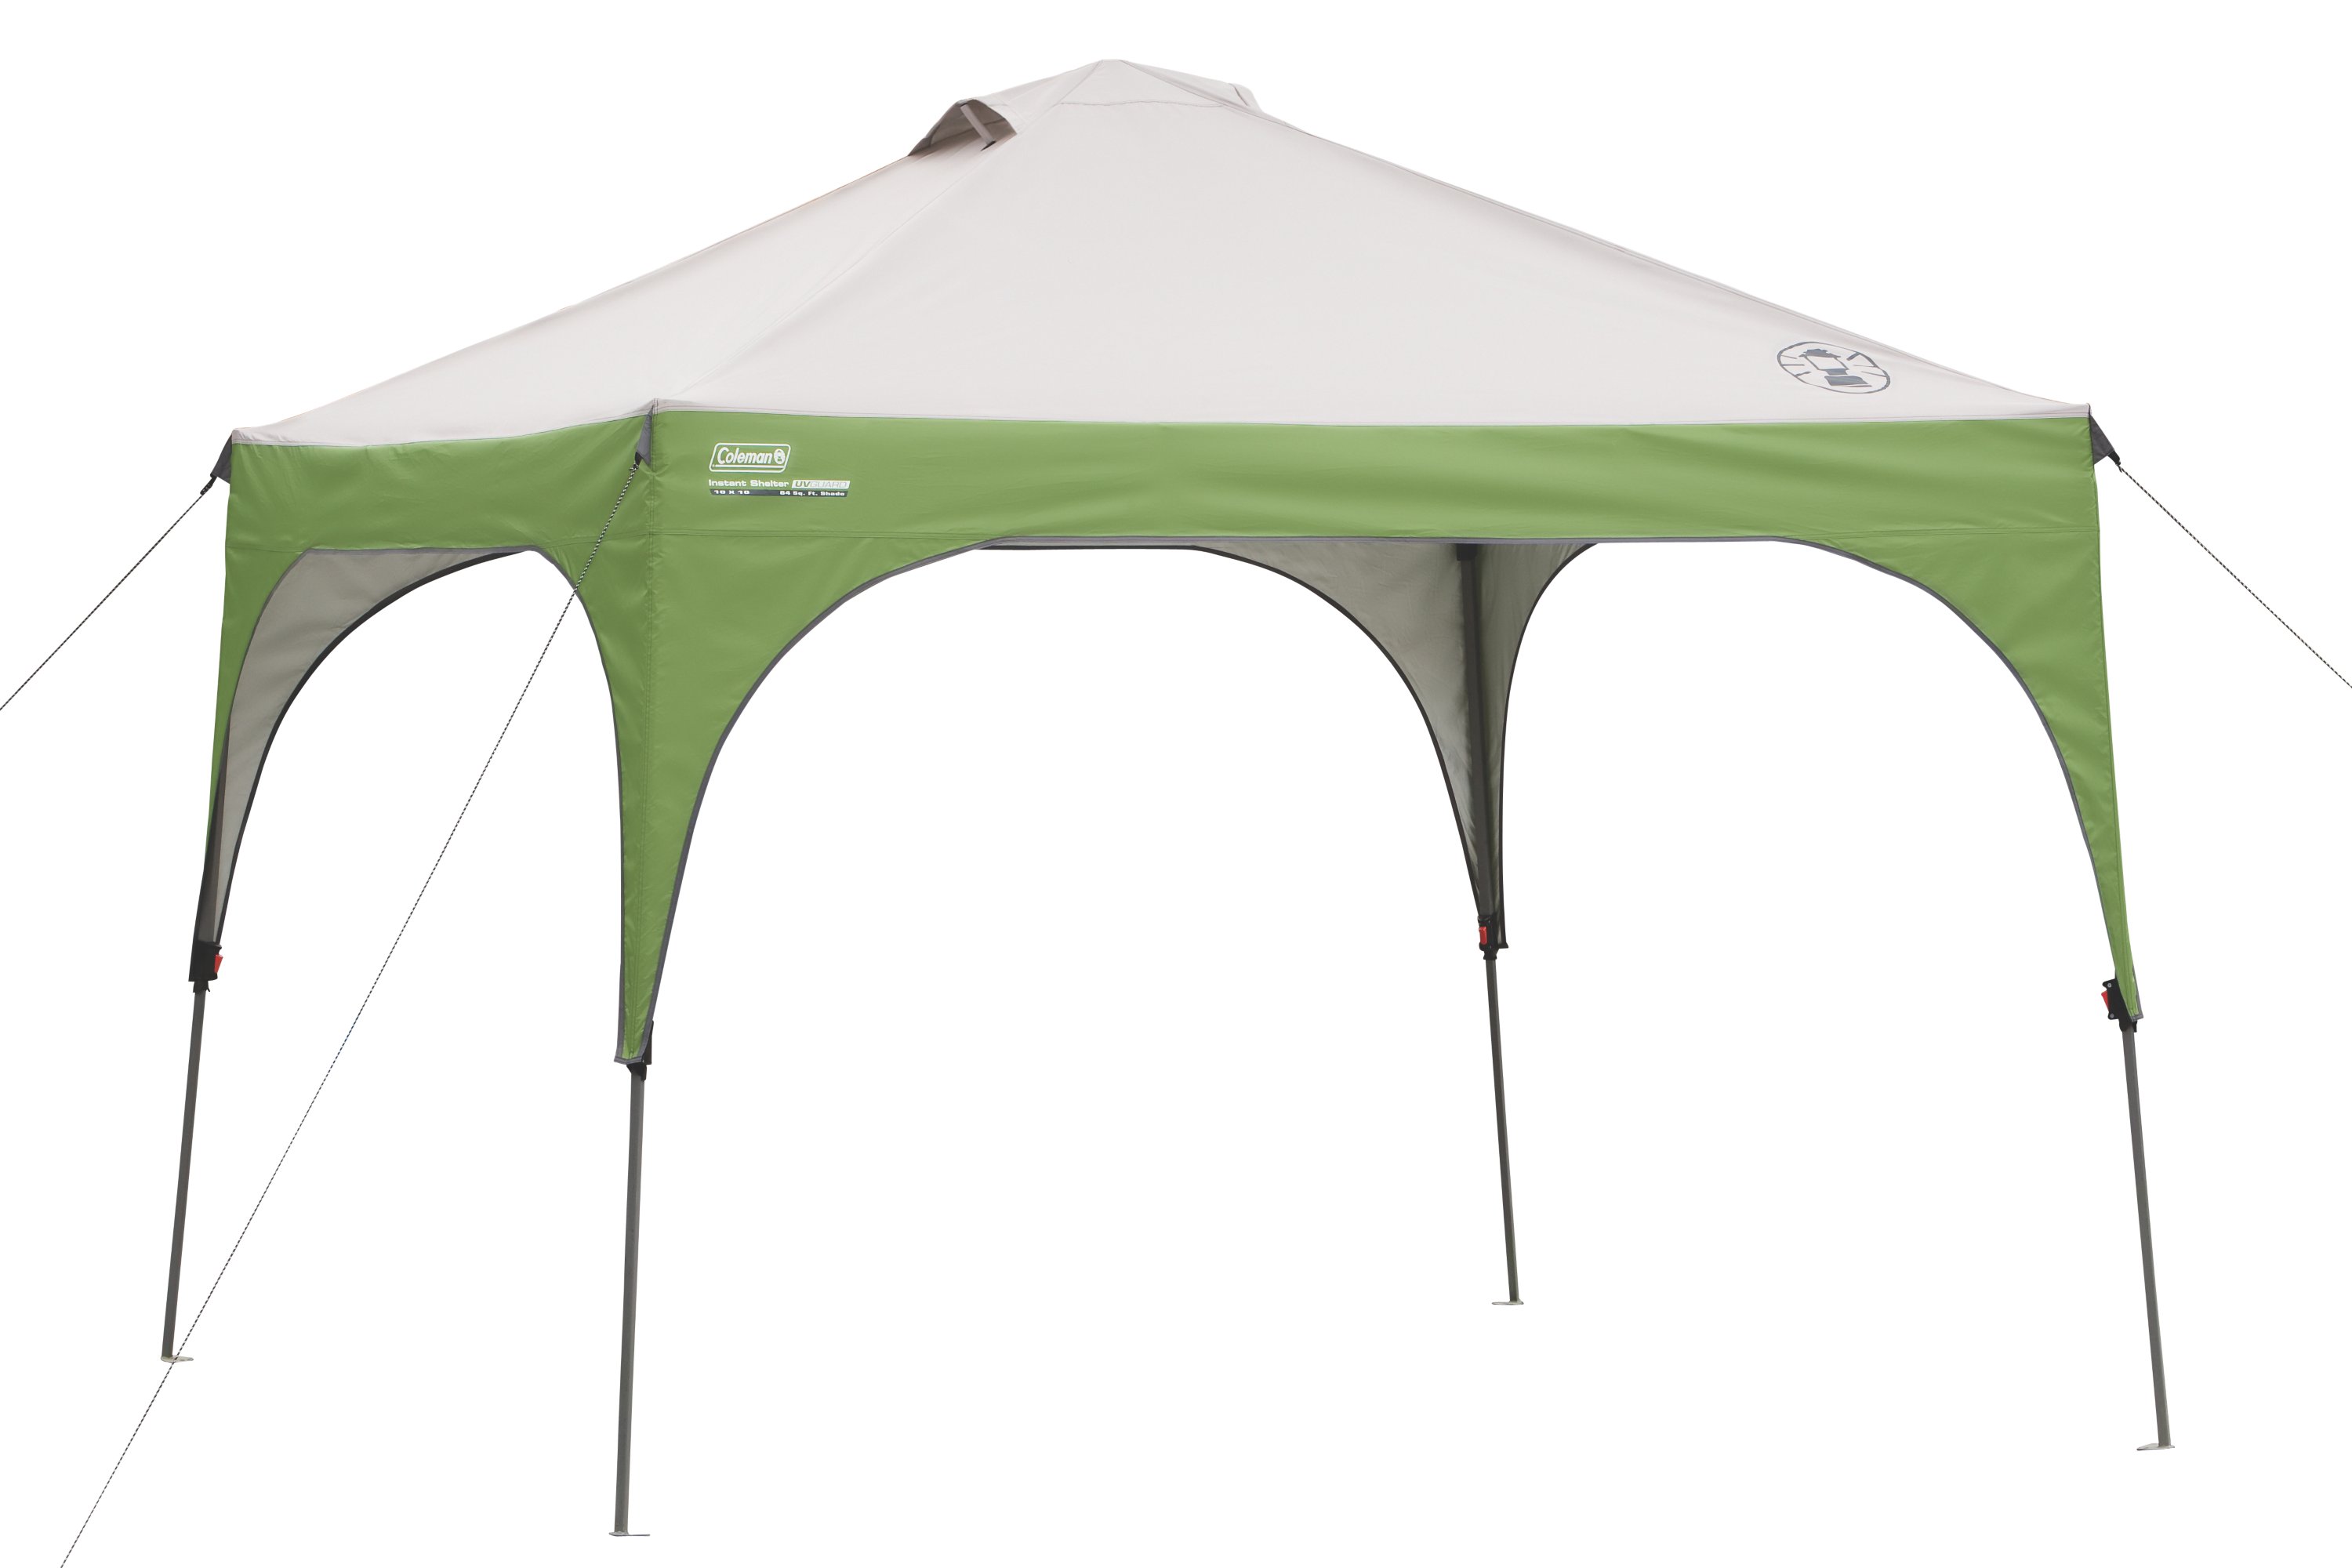 CANOPY RIGMA Automatic Camping Tent  2-3 Person-Pop up Tents-SUN SHELTER 